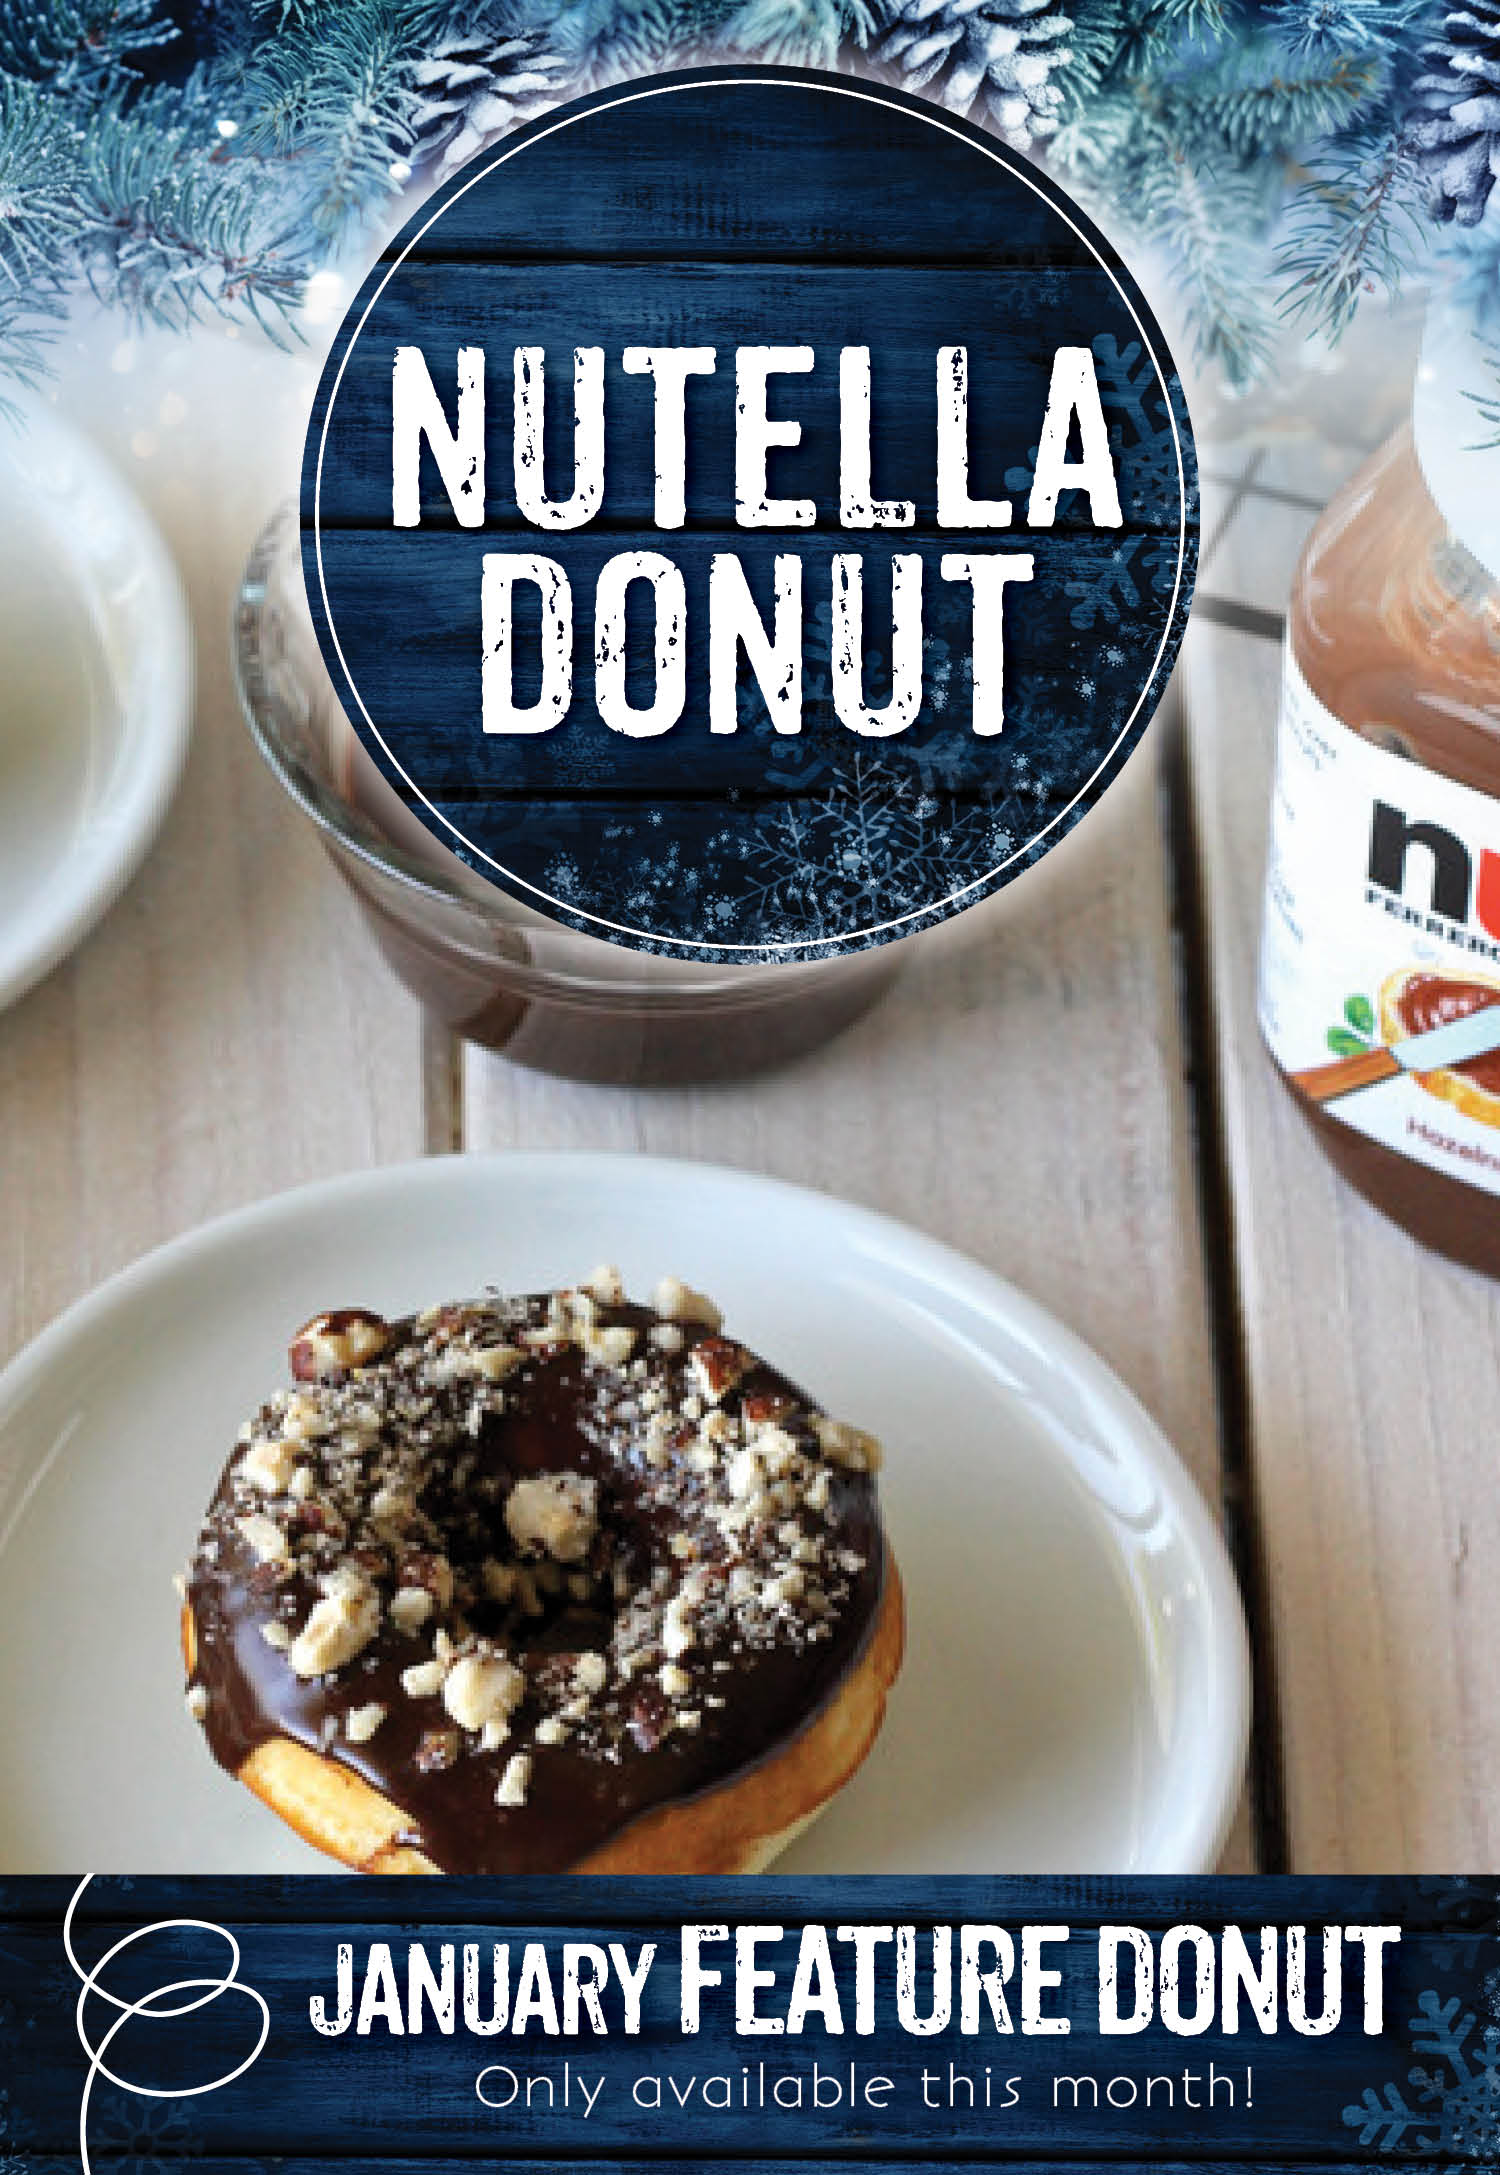 Invermere Bakery - Nutella Donut for January!